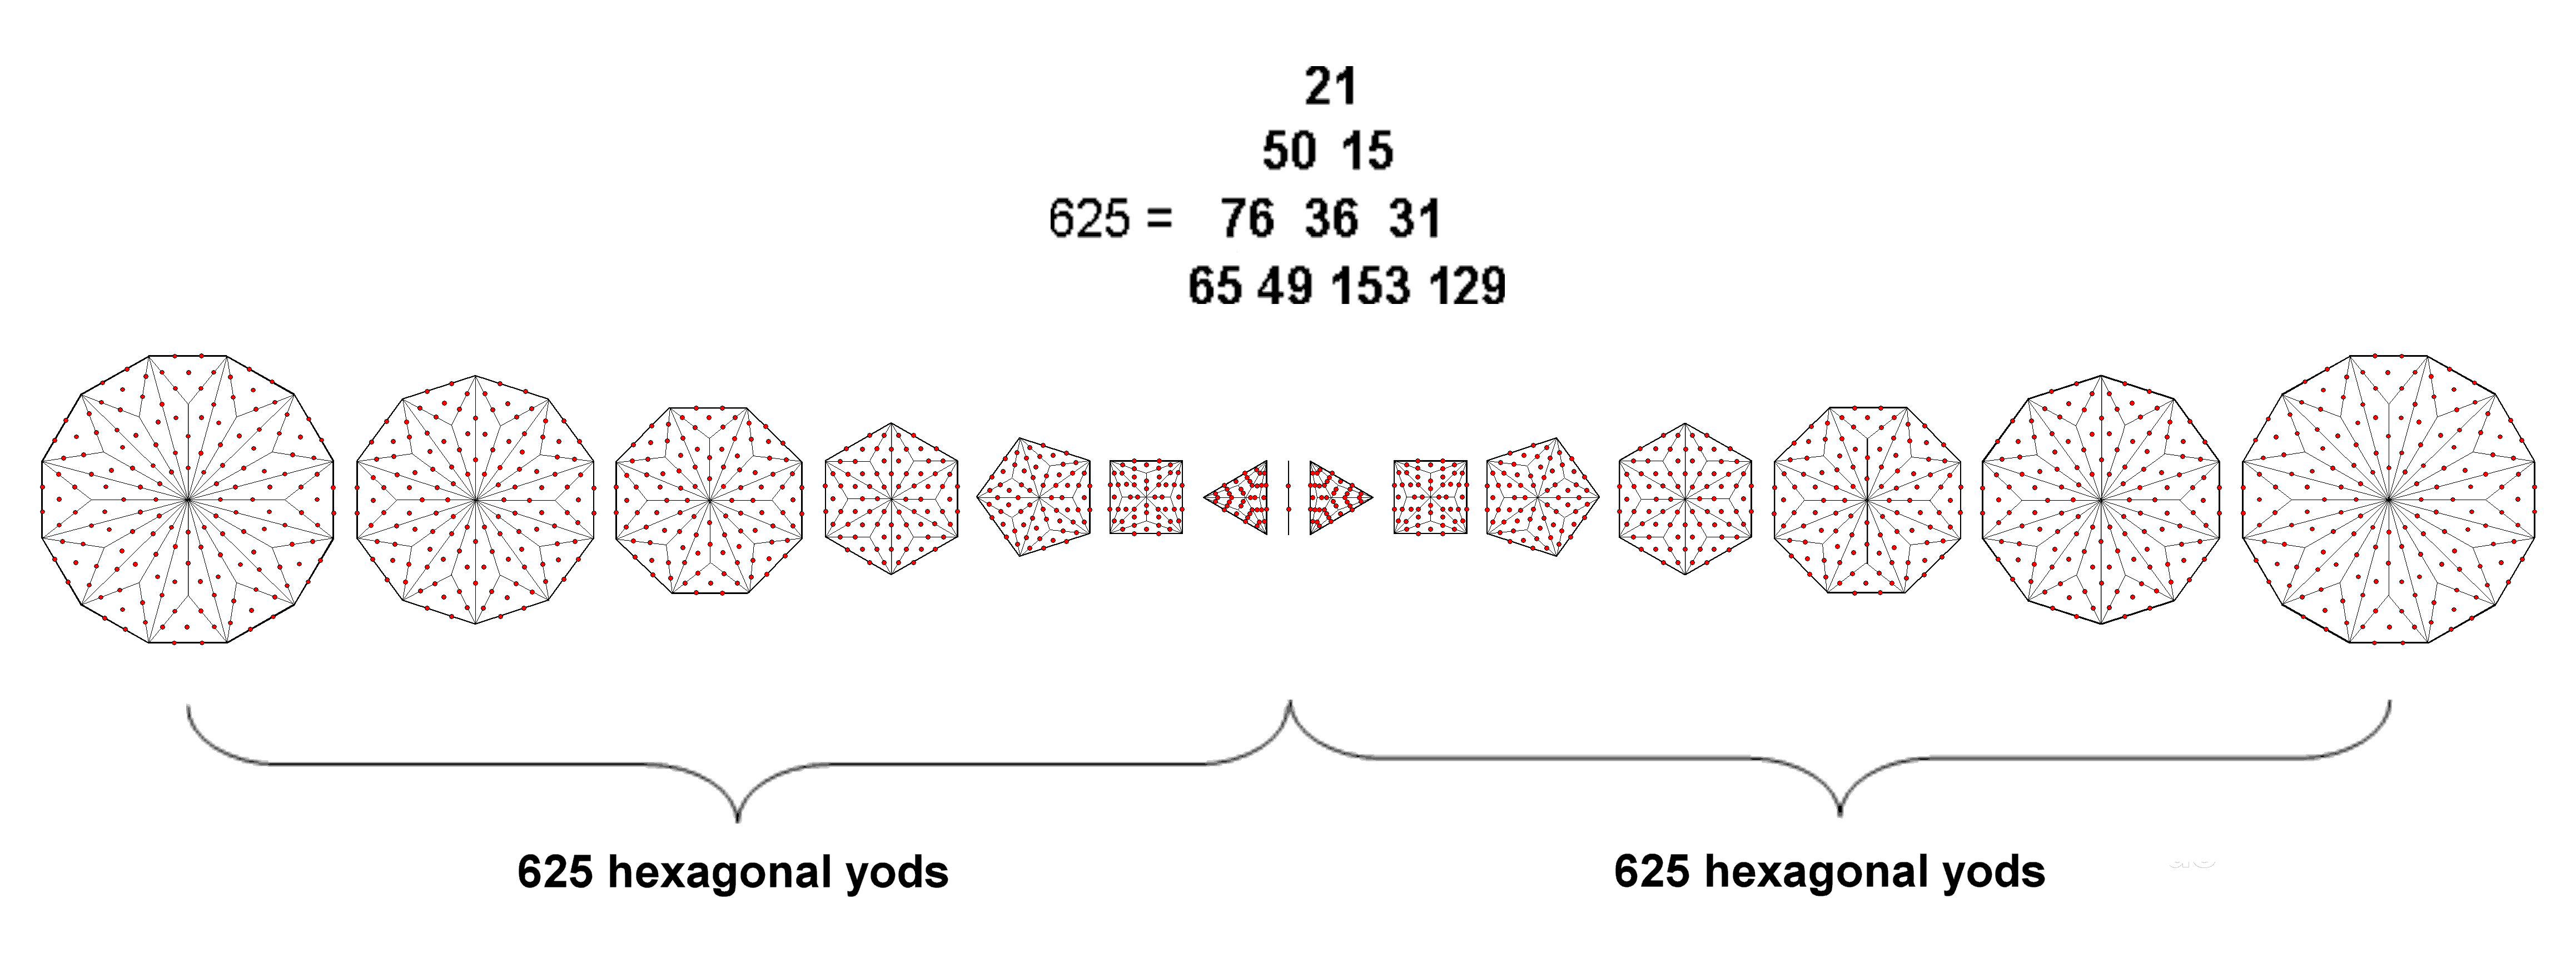 (625+625) hexagonal yods in (7+7) separate Type B polygons and root edge